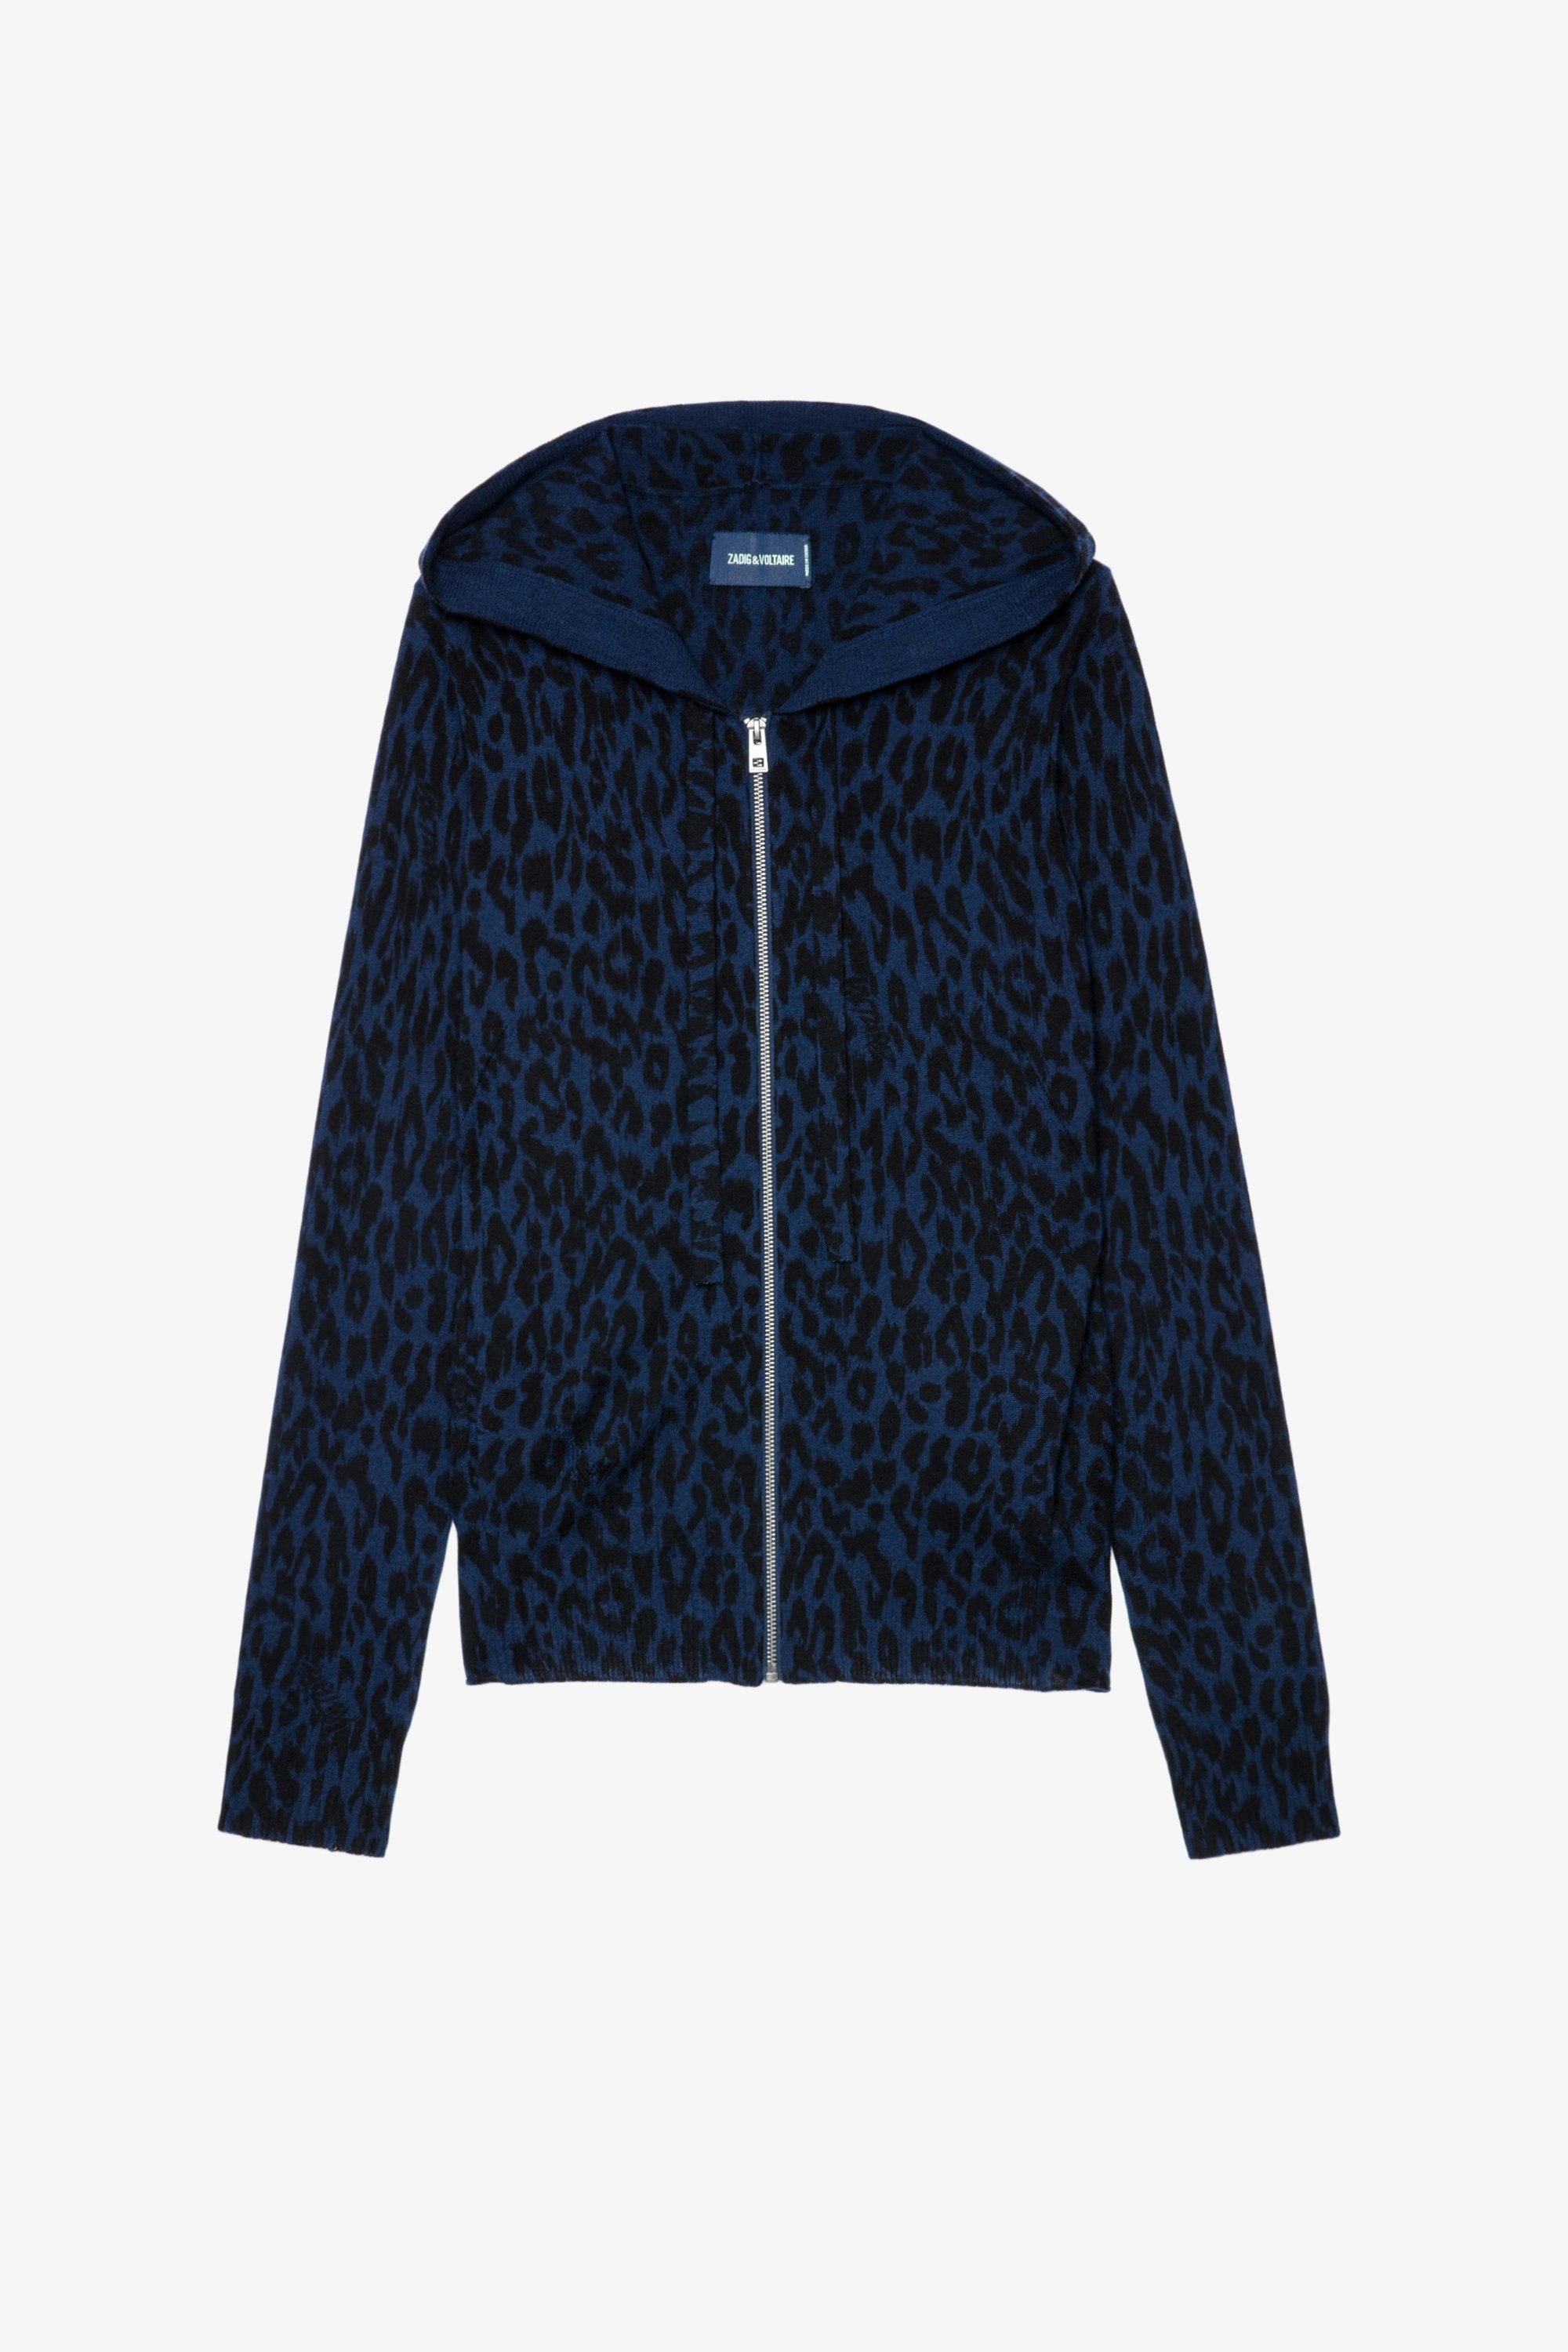 Cassy Cashmere Leo Cardigan Women’s hooded cardigan in navy blue feather cashmere with a leopard-print motif